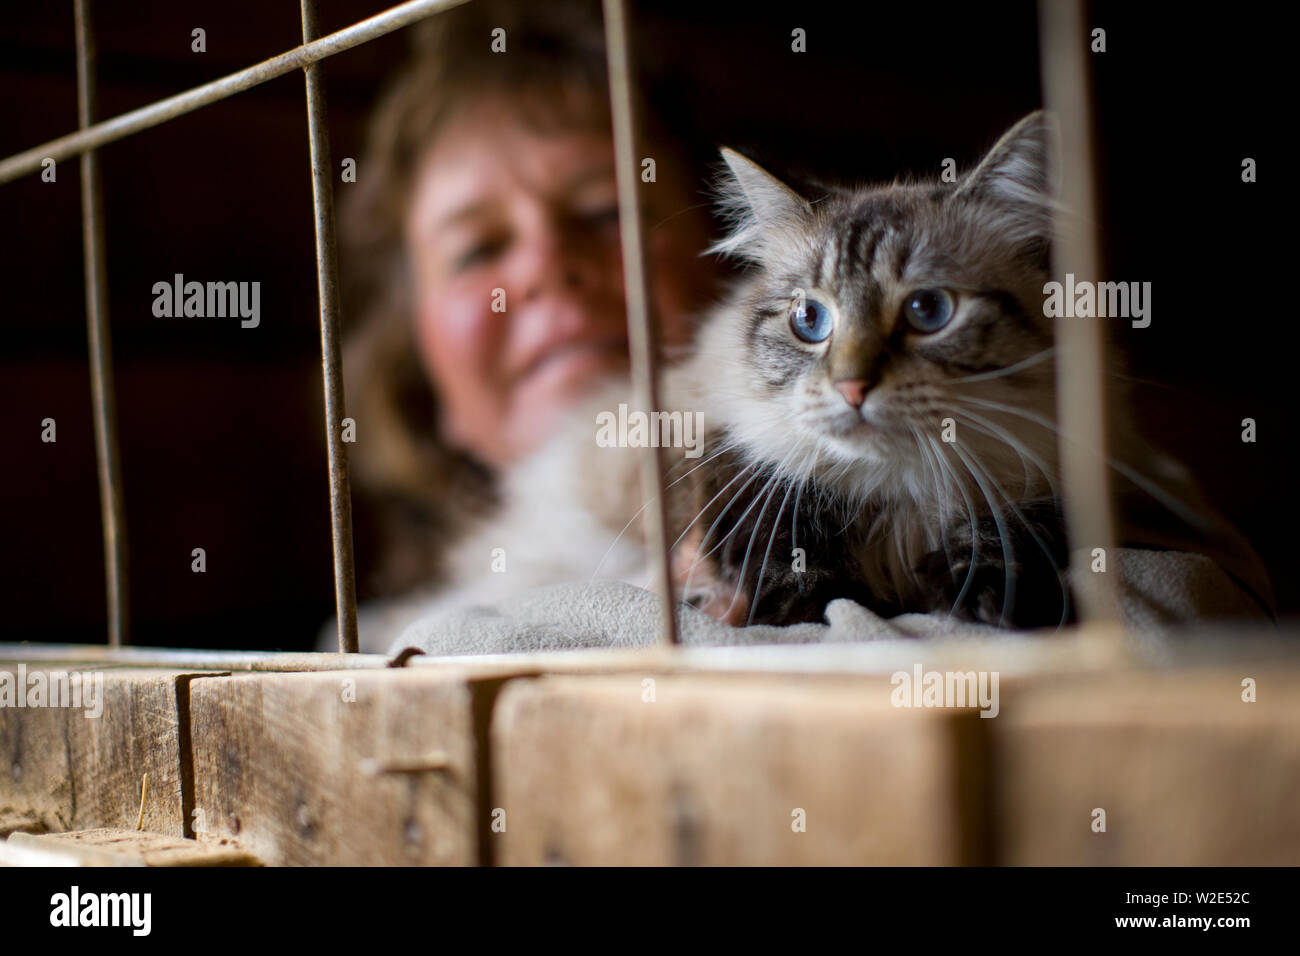 Woman in stable with cat Stock Photo